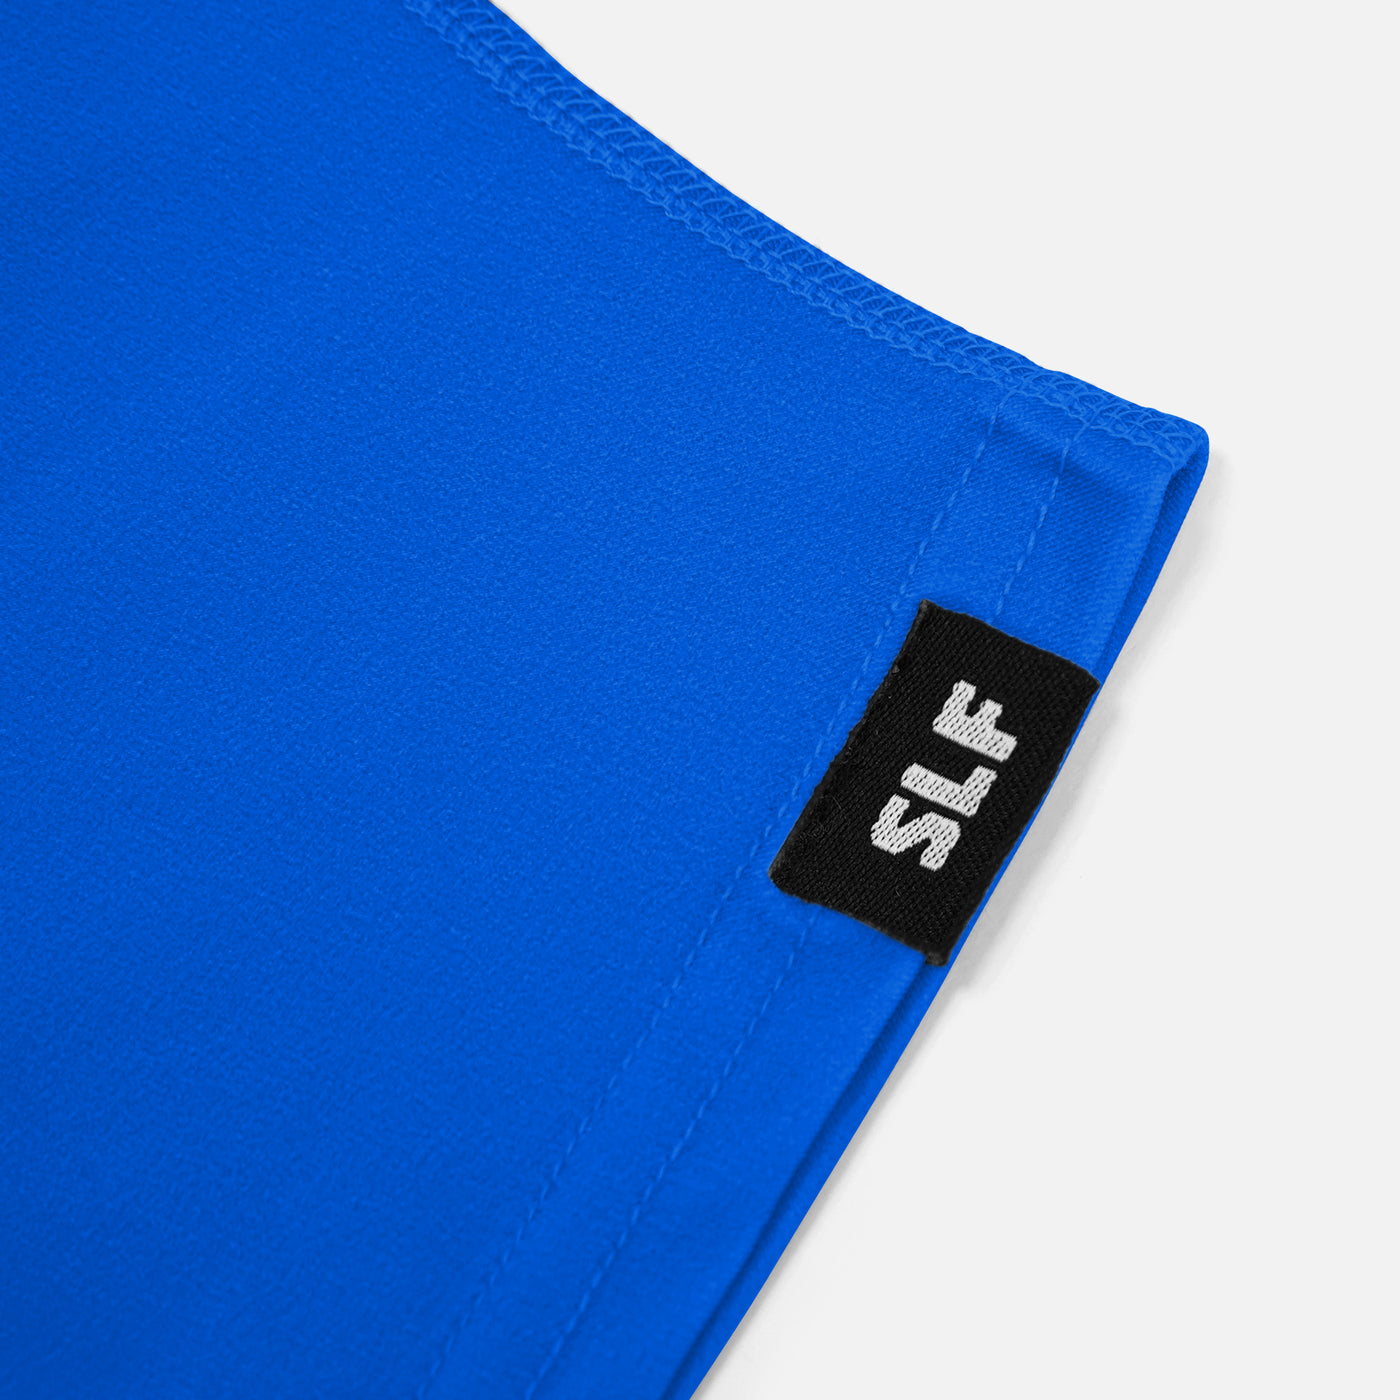 Hue Blue Kids Spats / Cleat Covers